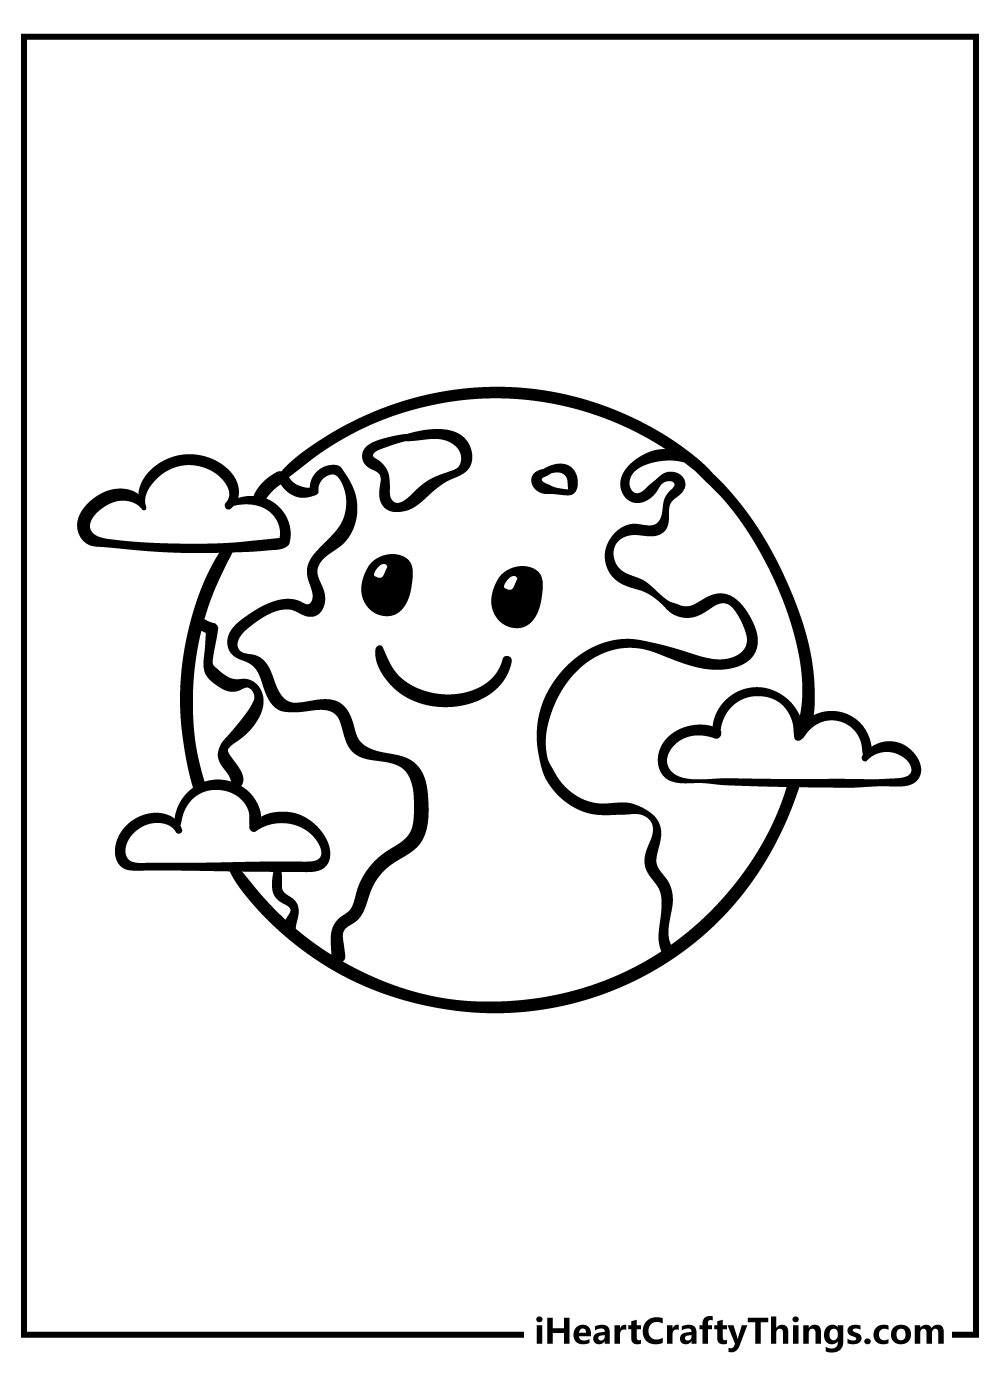 Earth Coloring Pages free pdf download